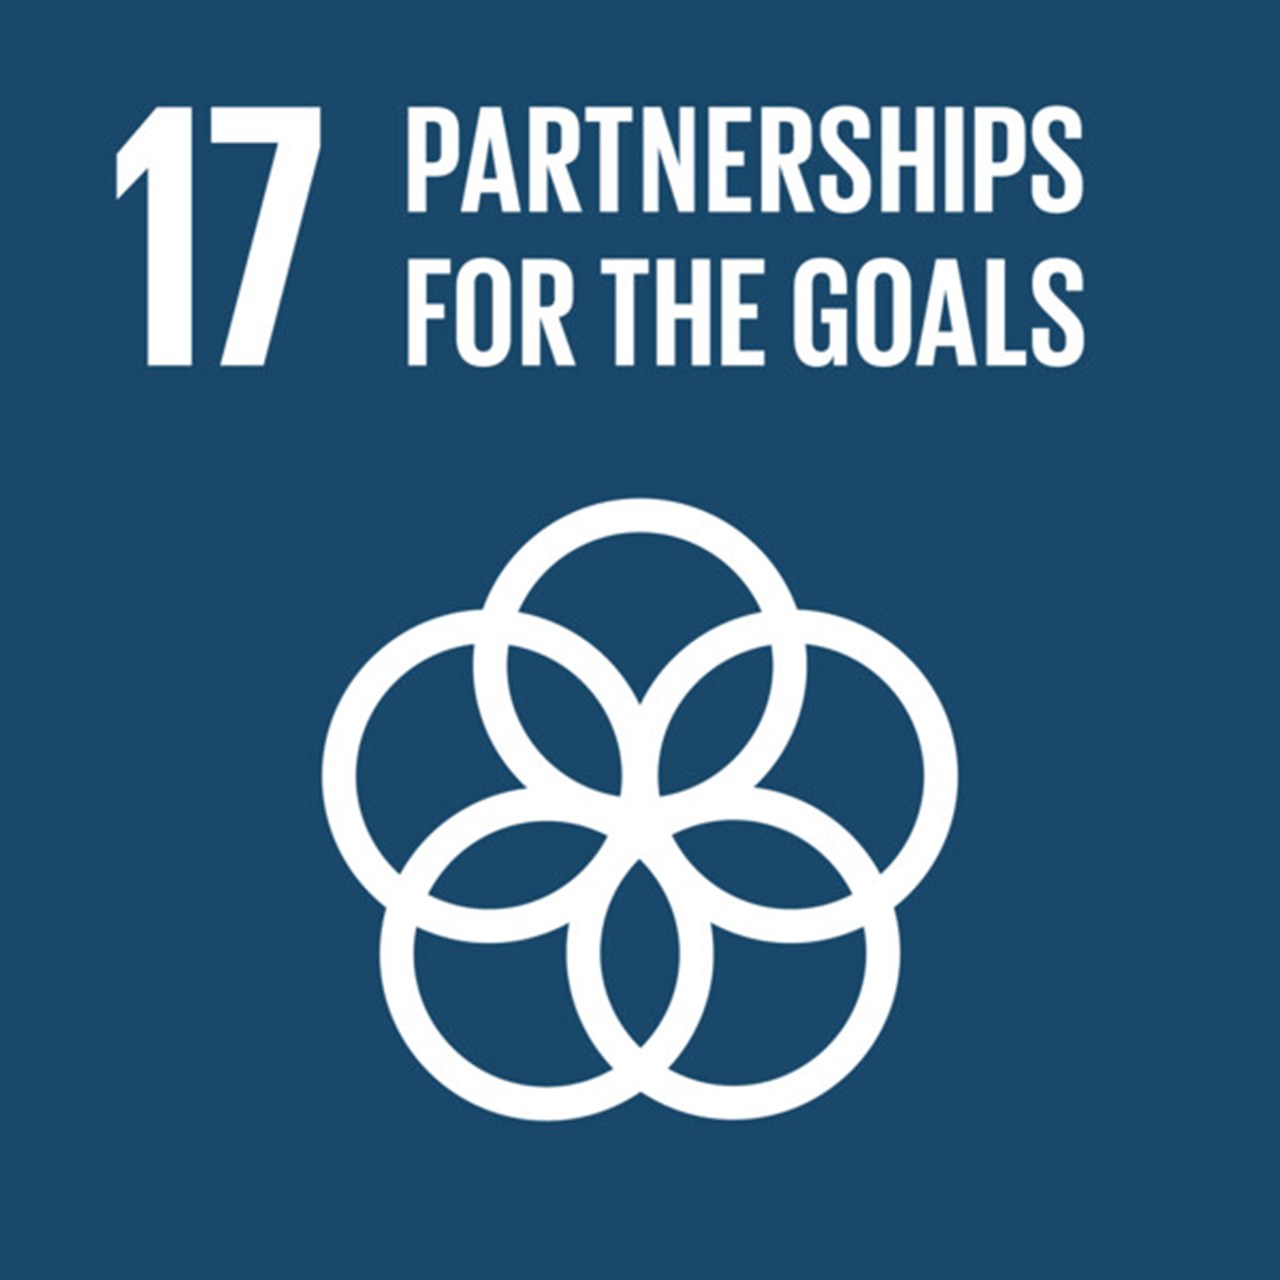 The Global Goals, Goal 17 - Partnerships for the Goals